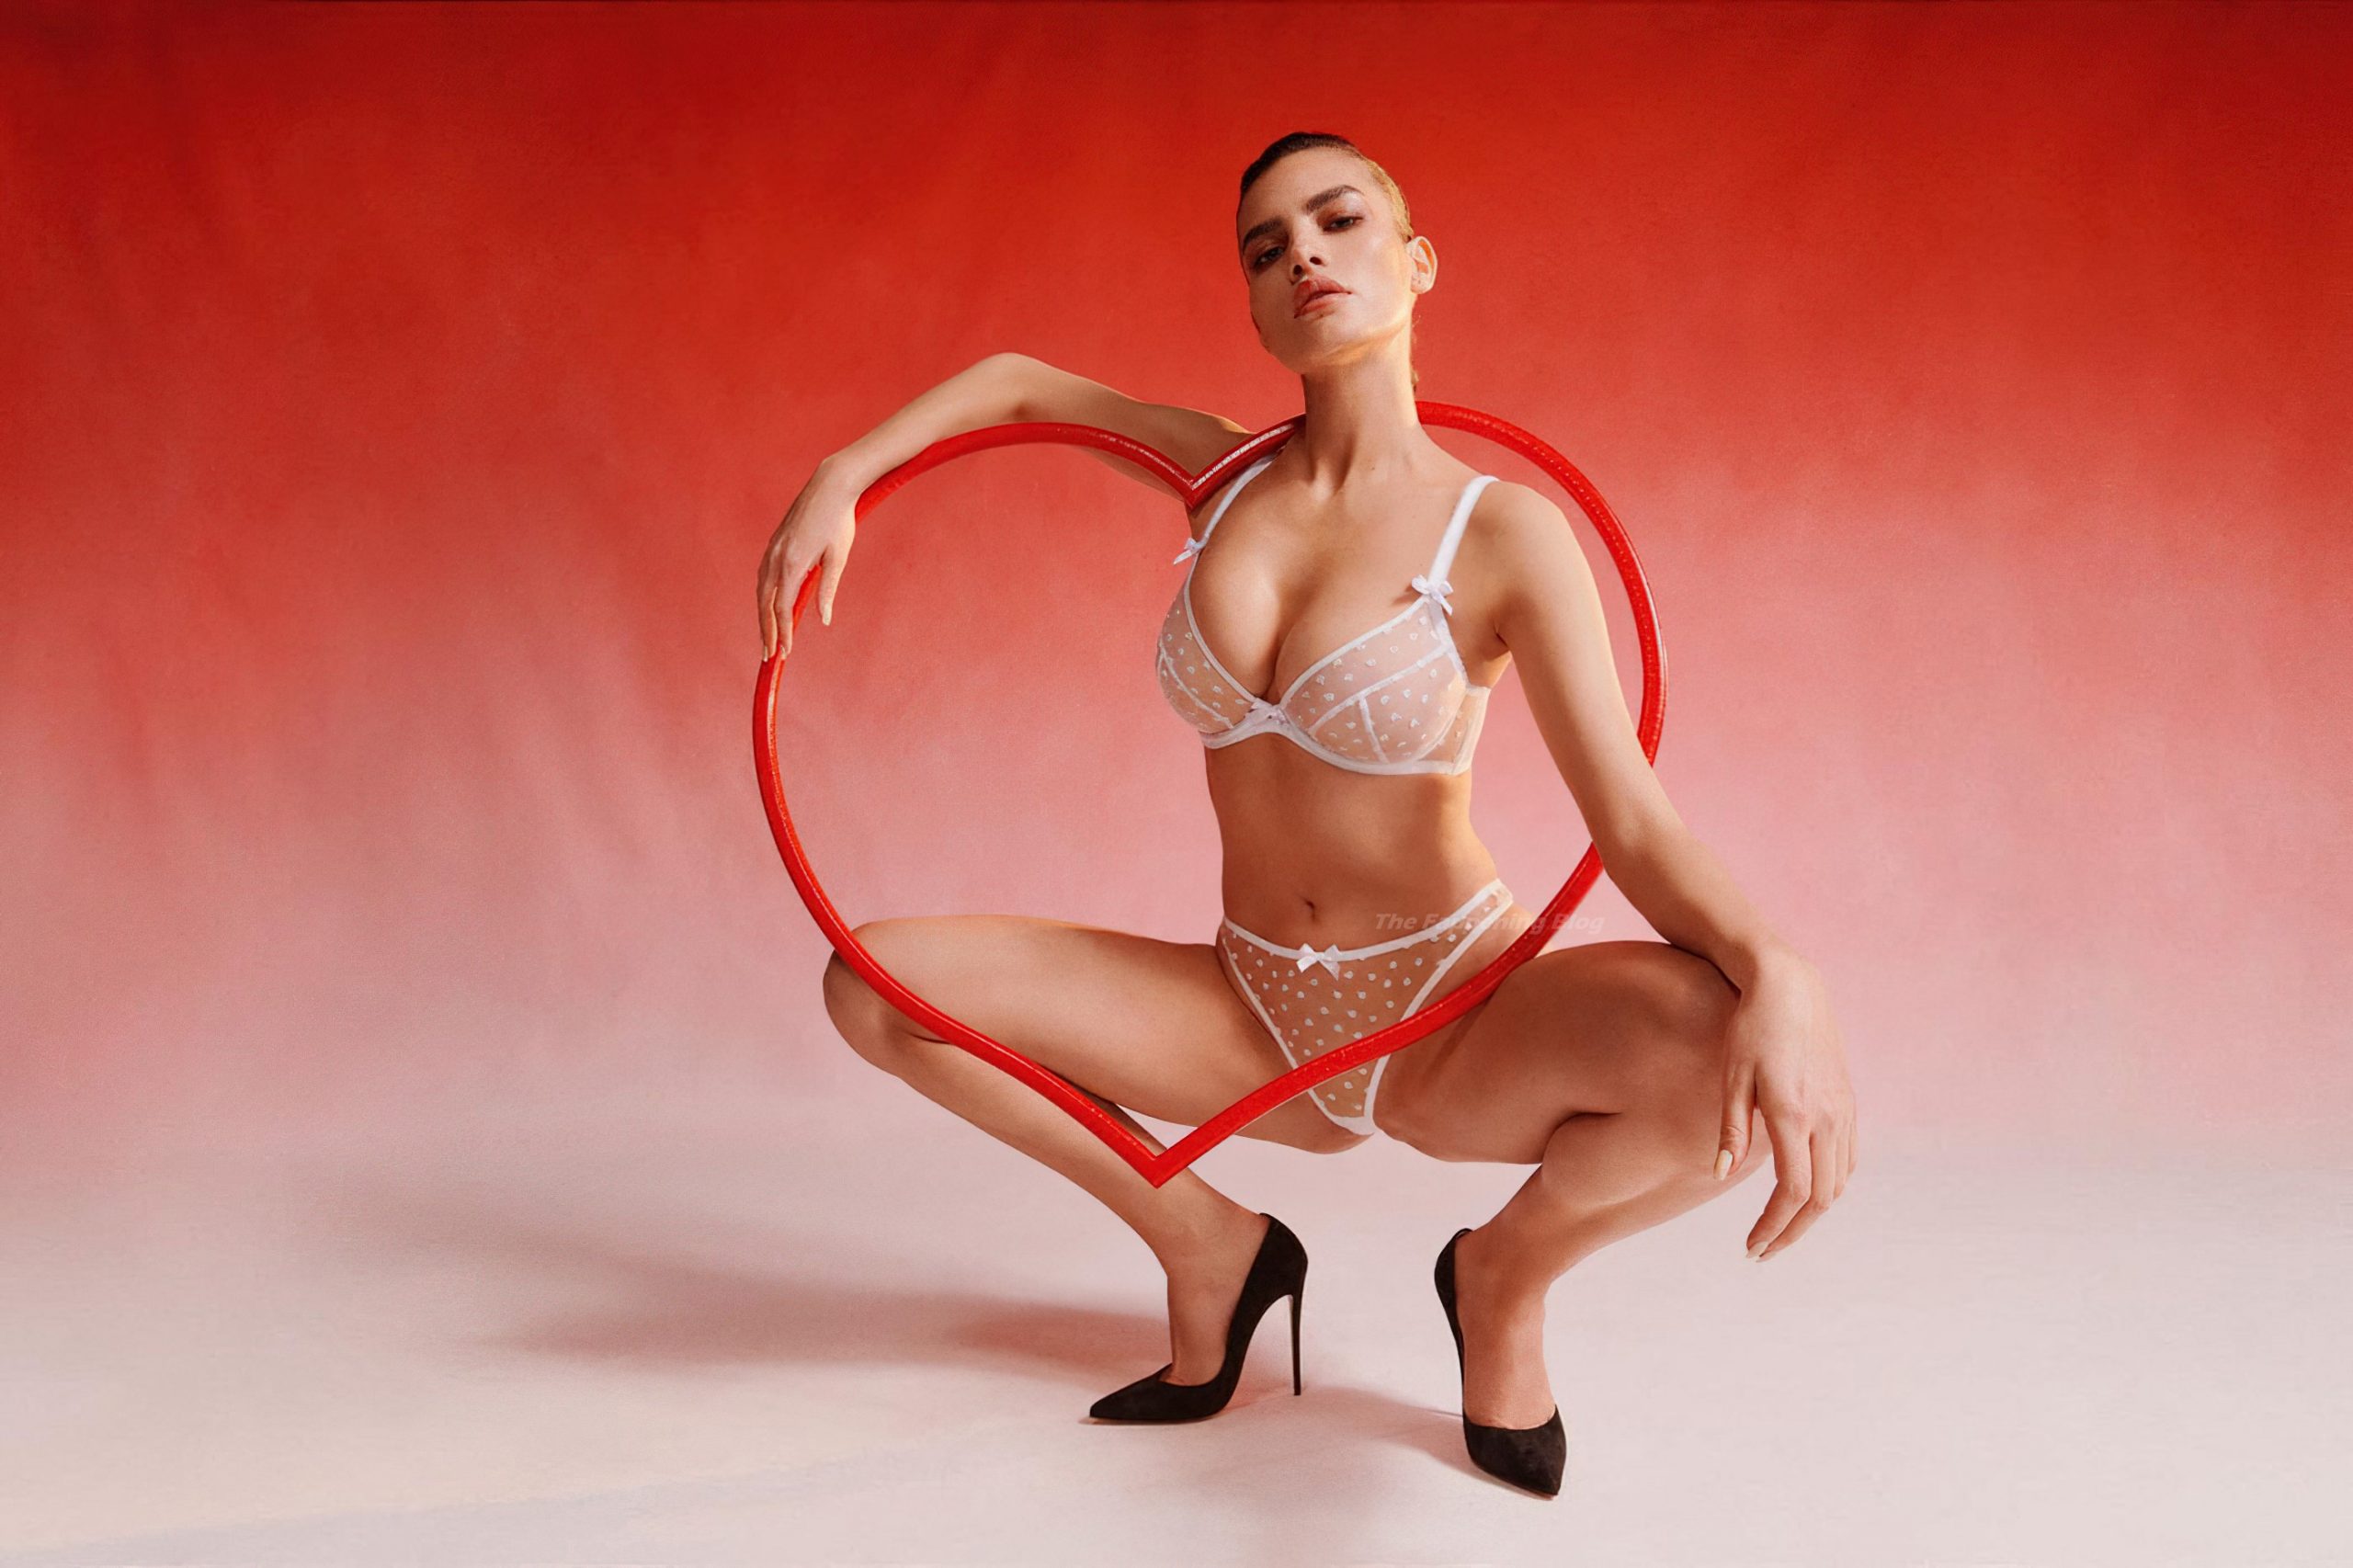 Valentines Day Campaign From the English Lingerie Brand Agent Provocateur (11 Photos)